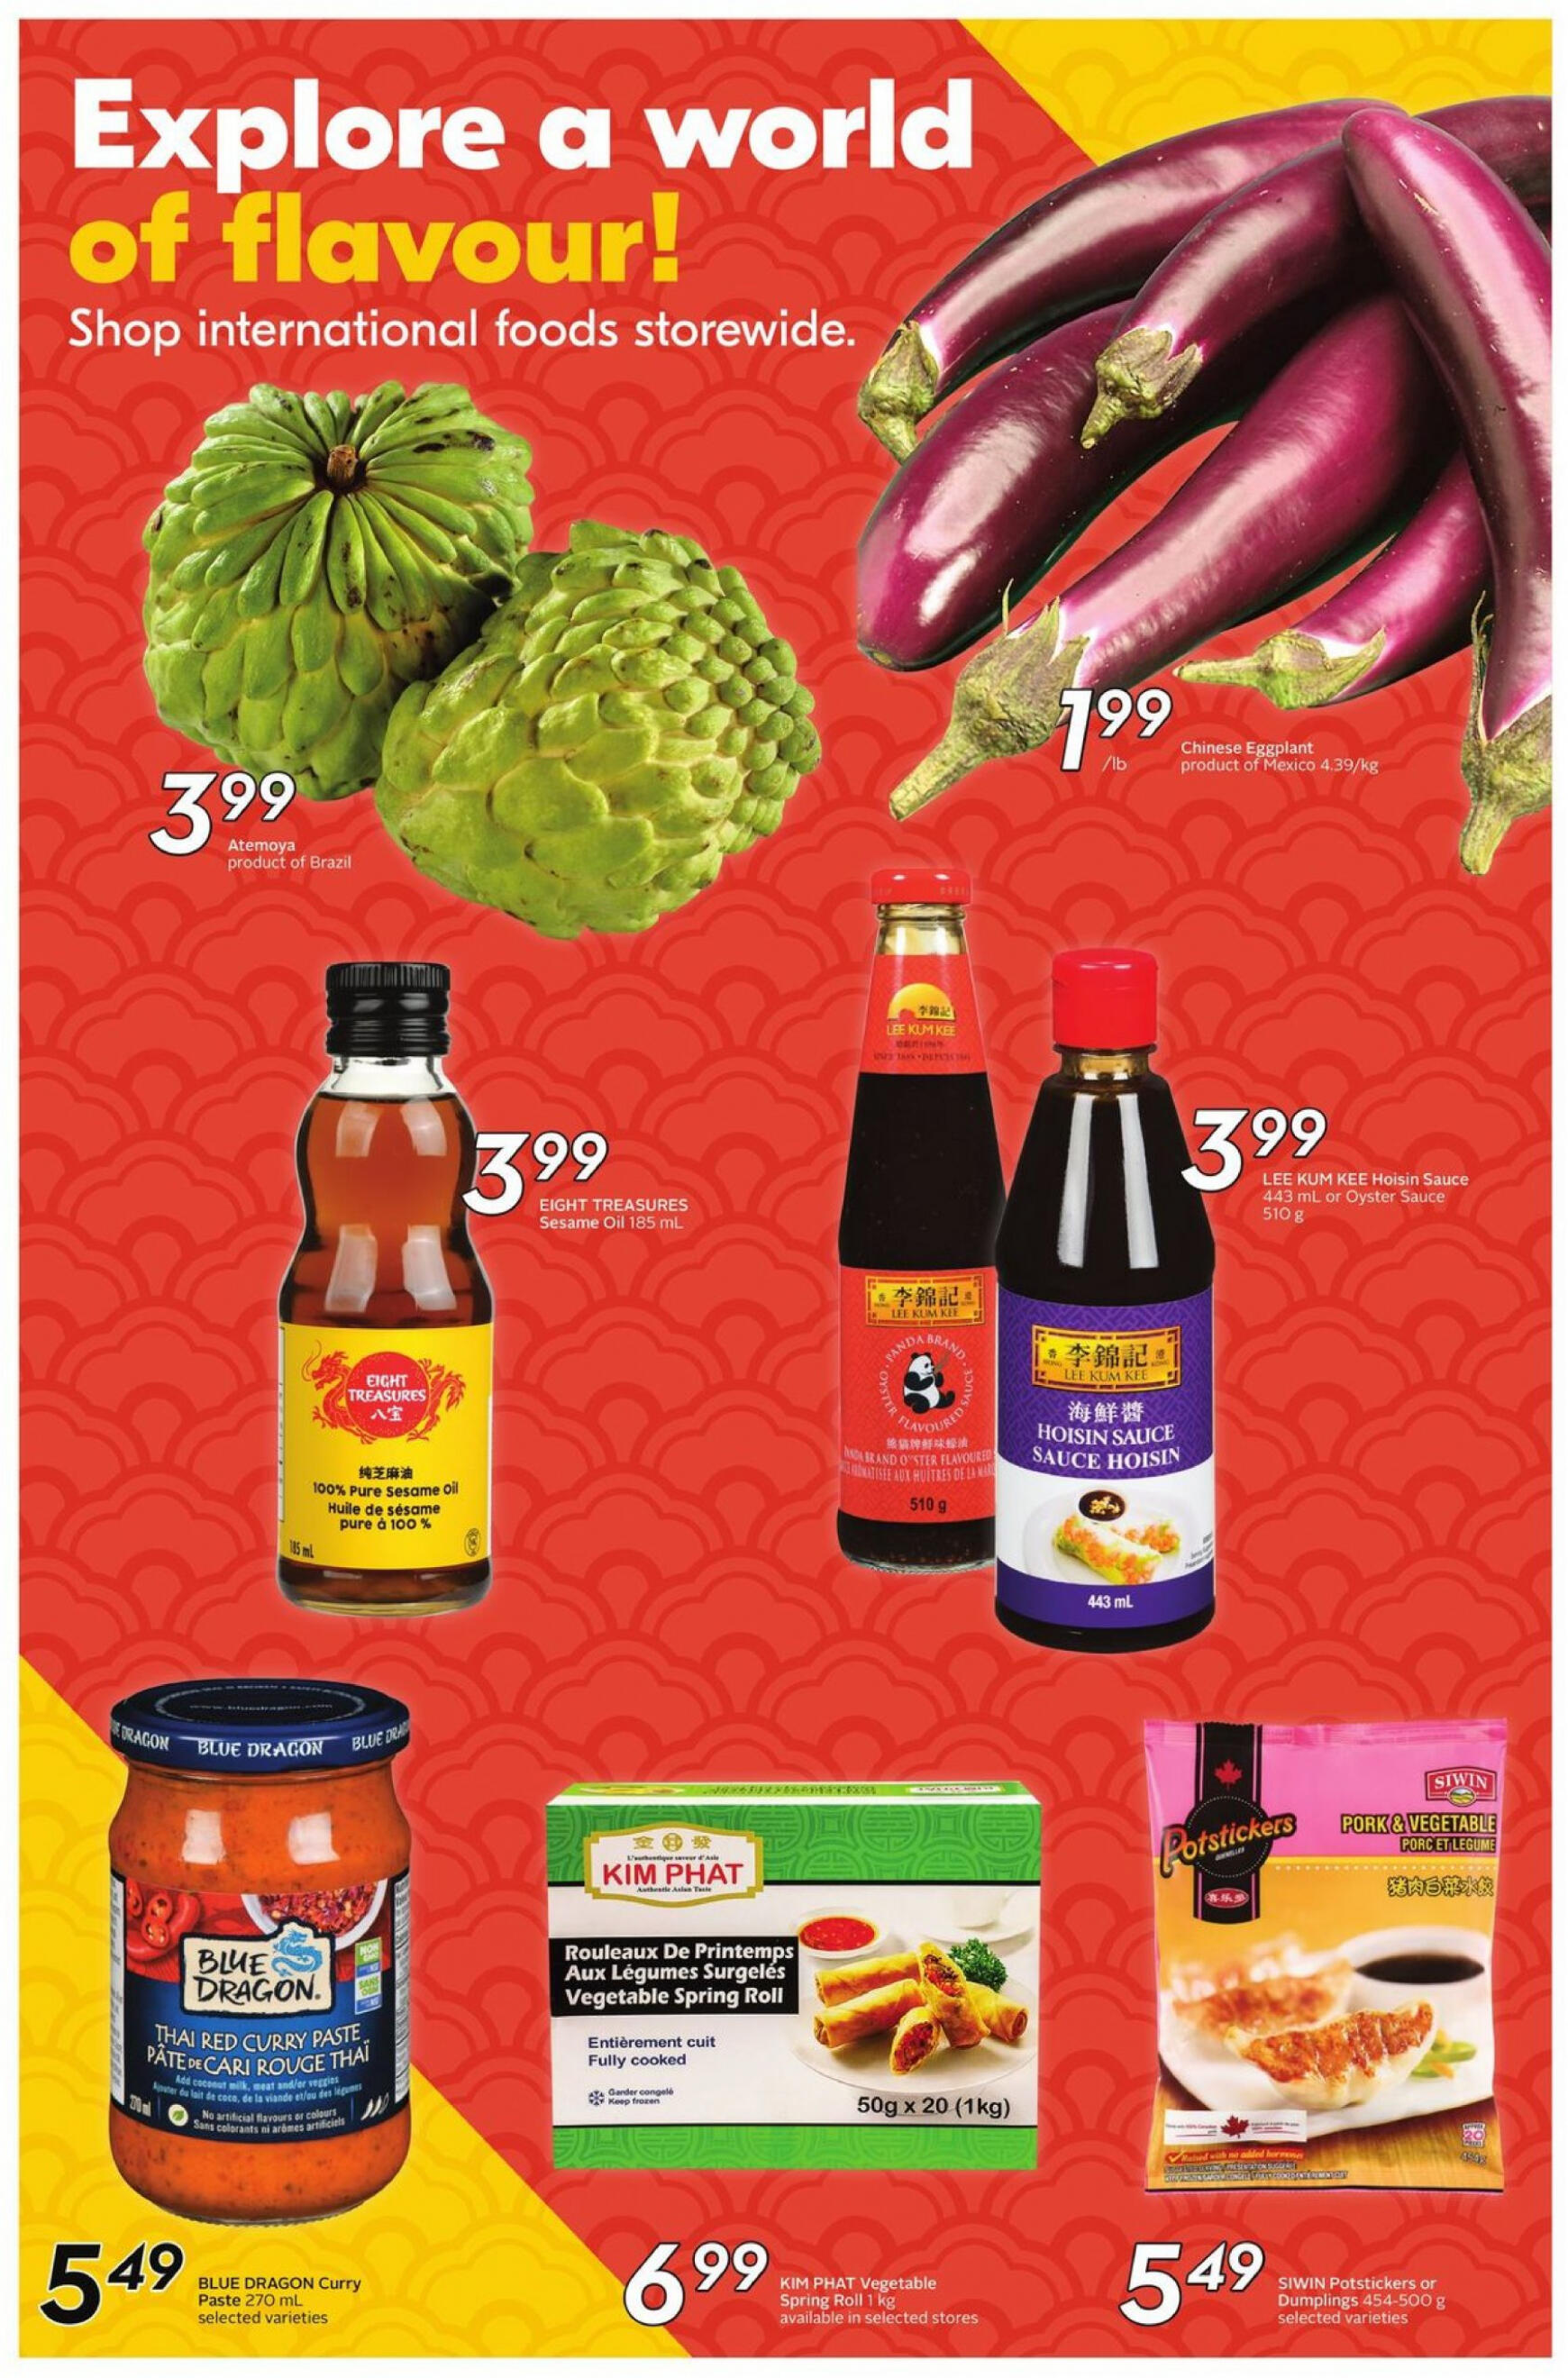 sobeys - Sobeys - Weekly Flyer - Ontario flyer current 23.05. - 29.05. - page: 18